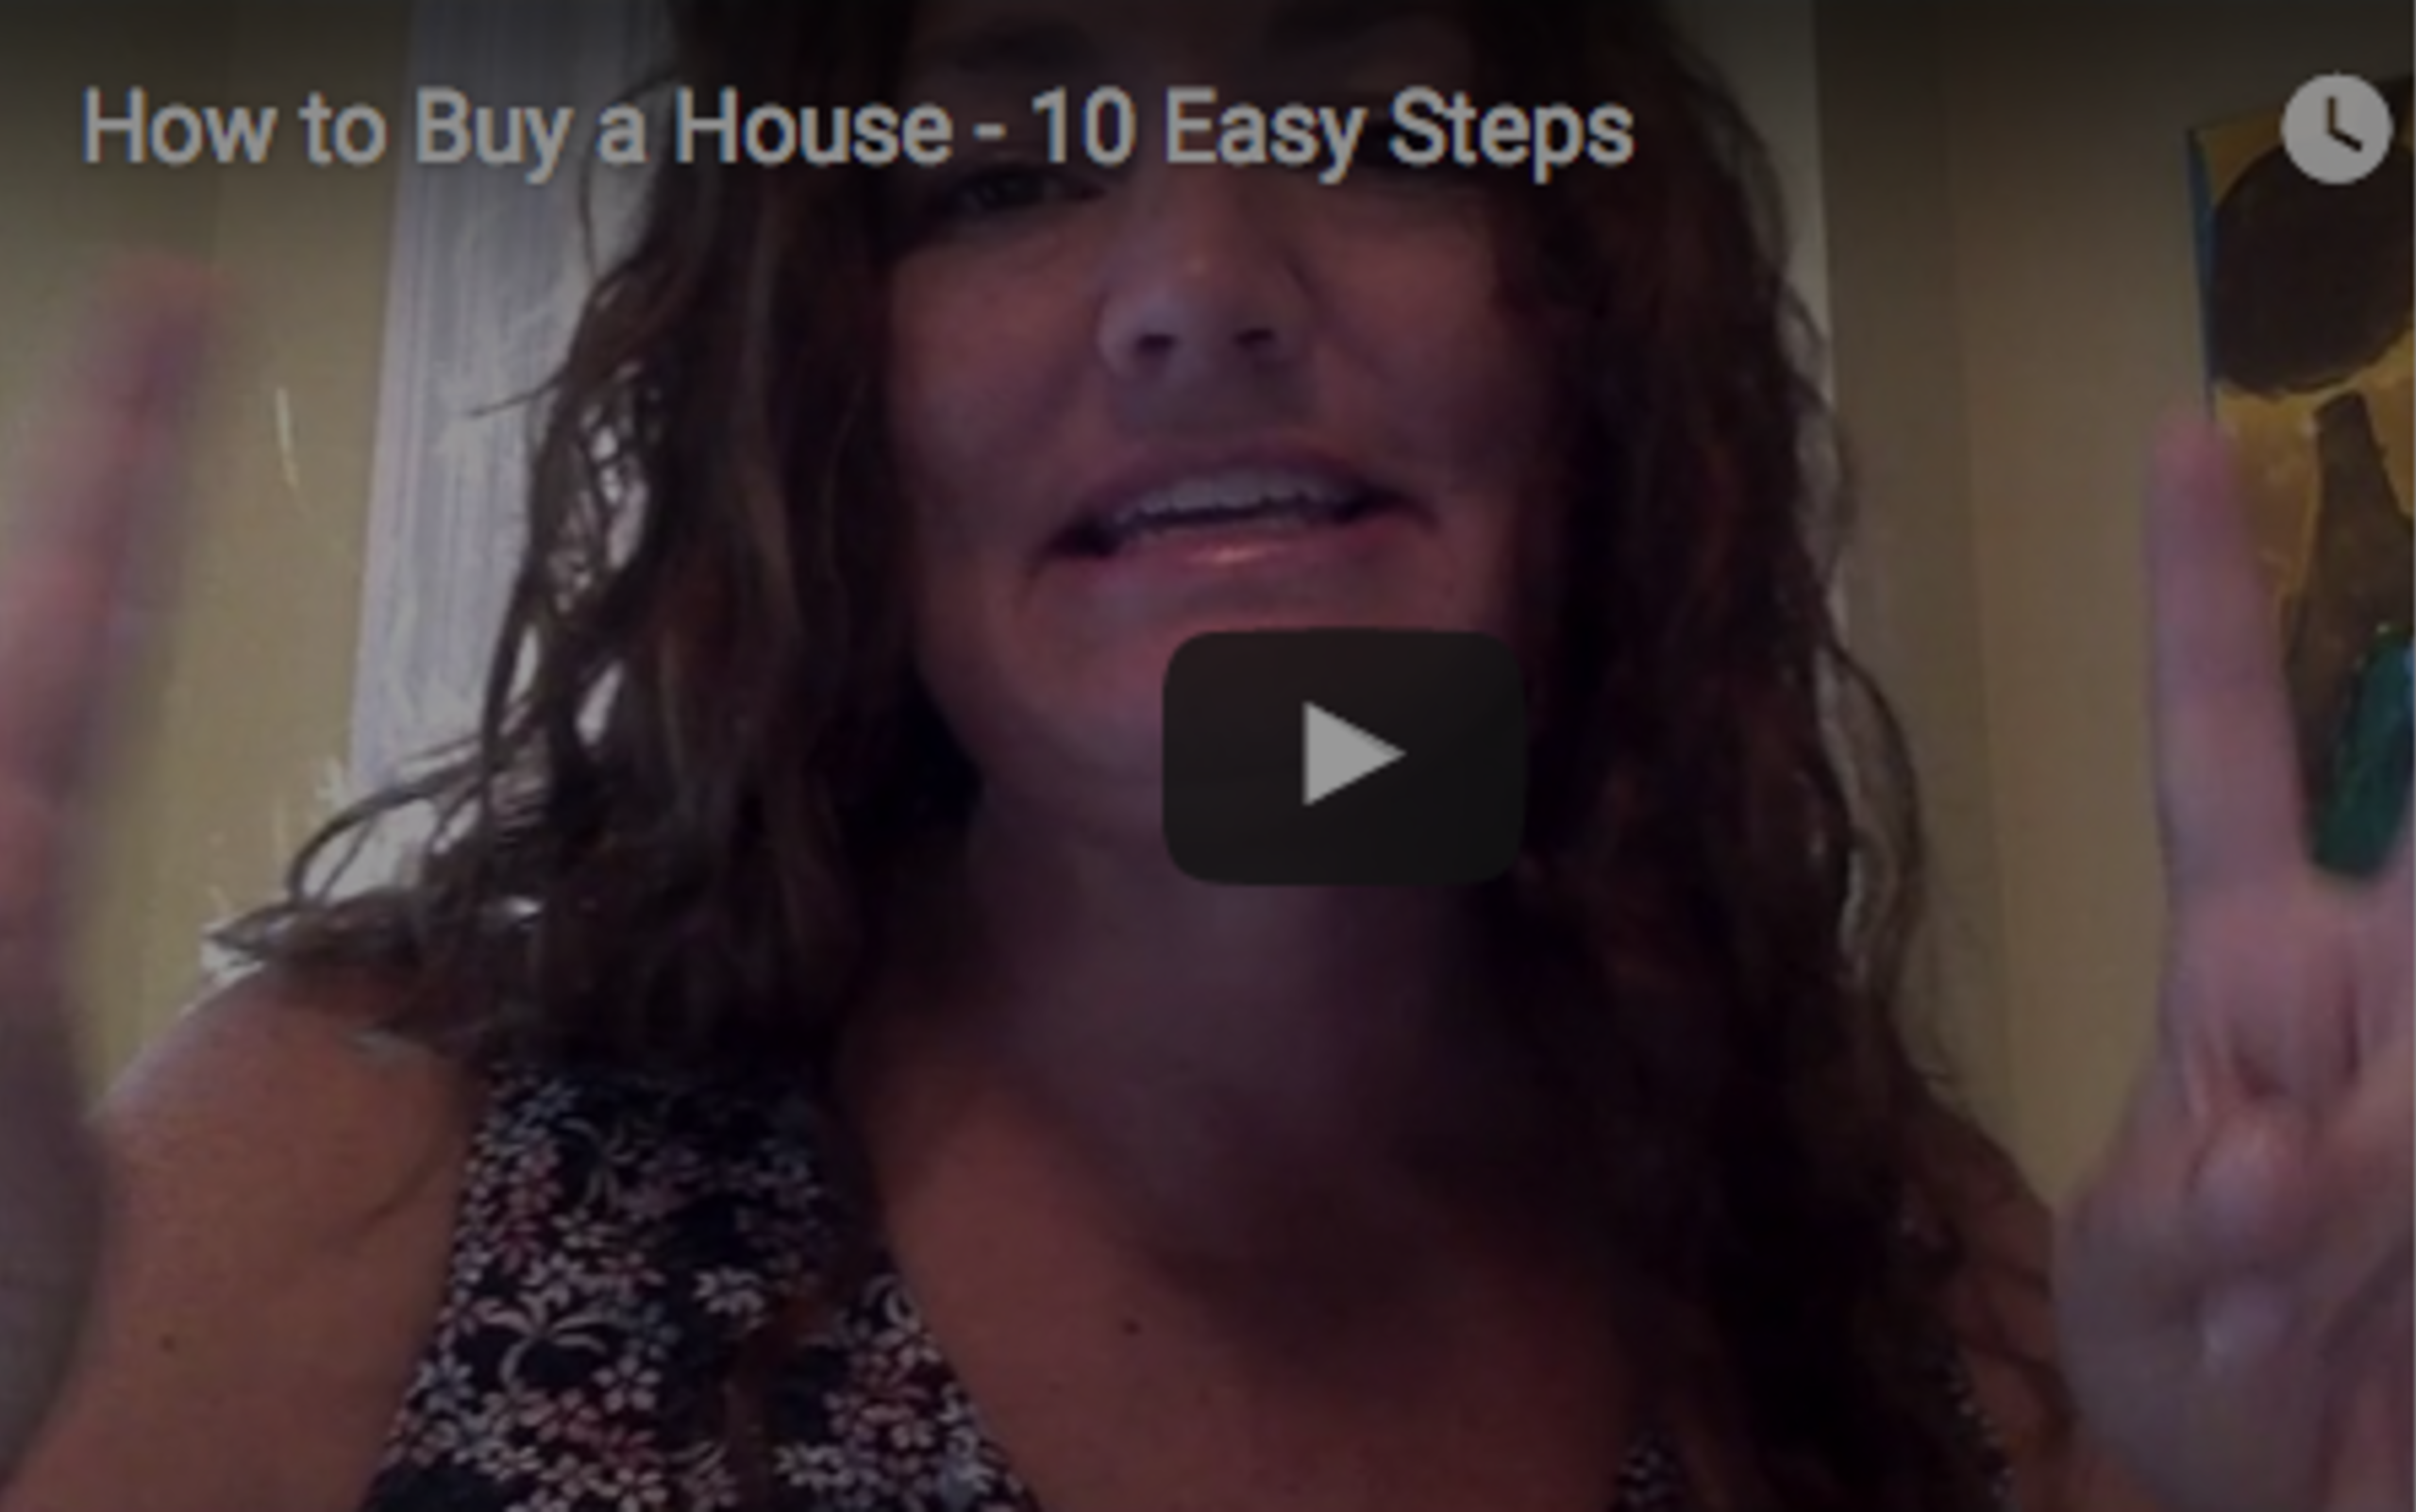 How to Buy a House in 10 Easy Steps